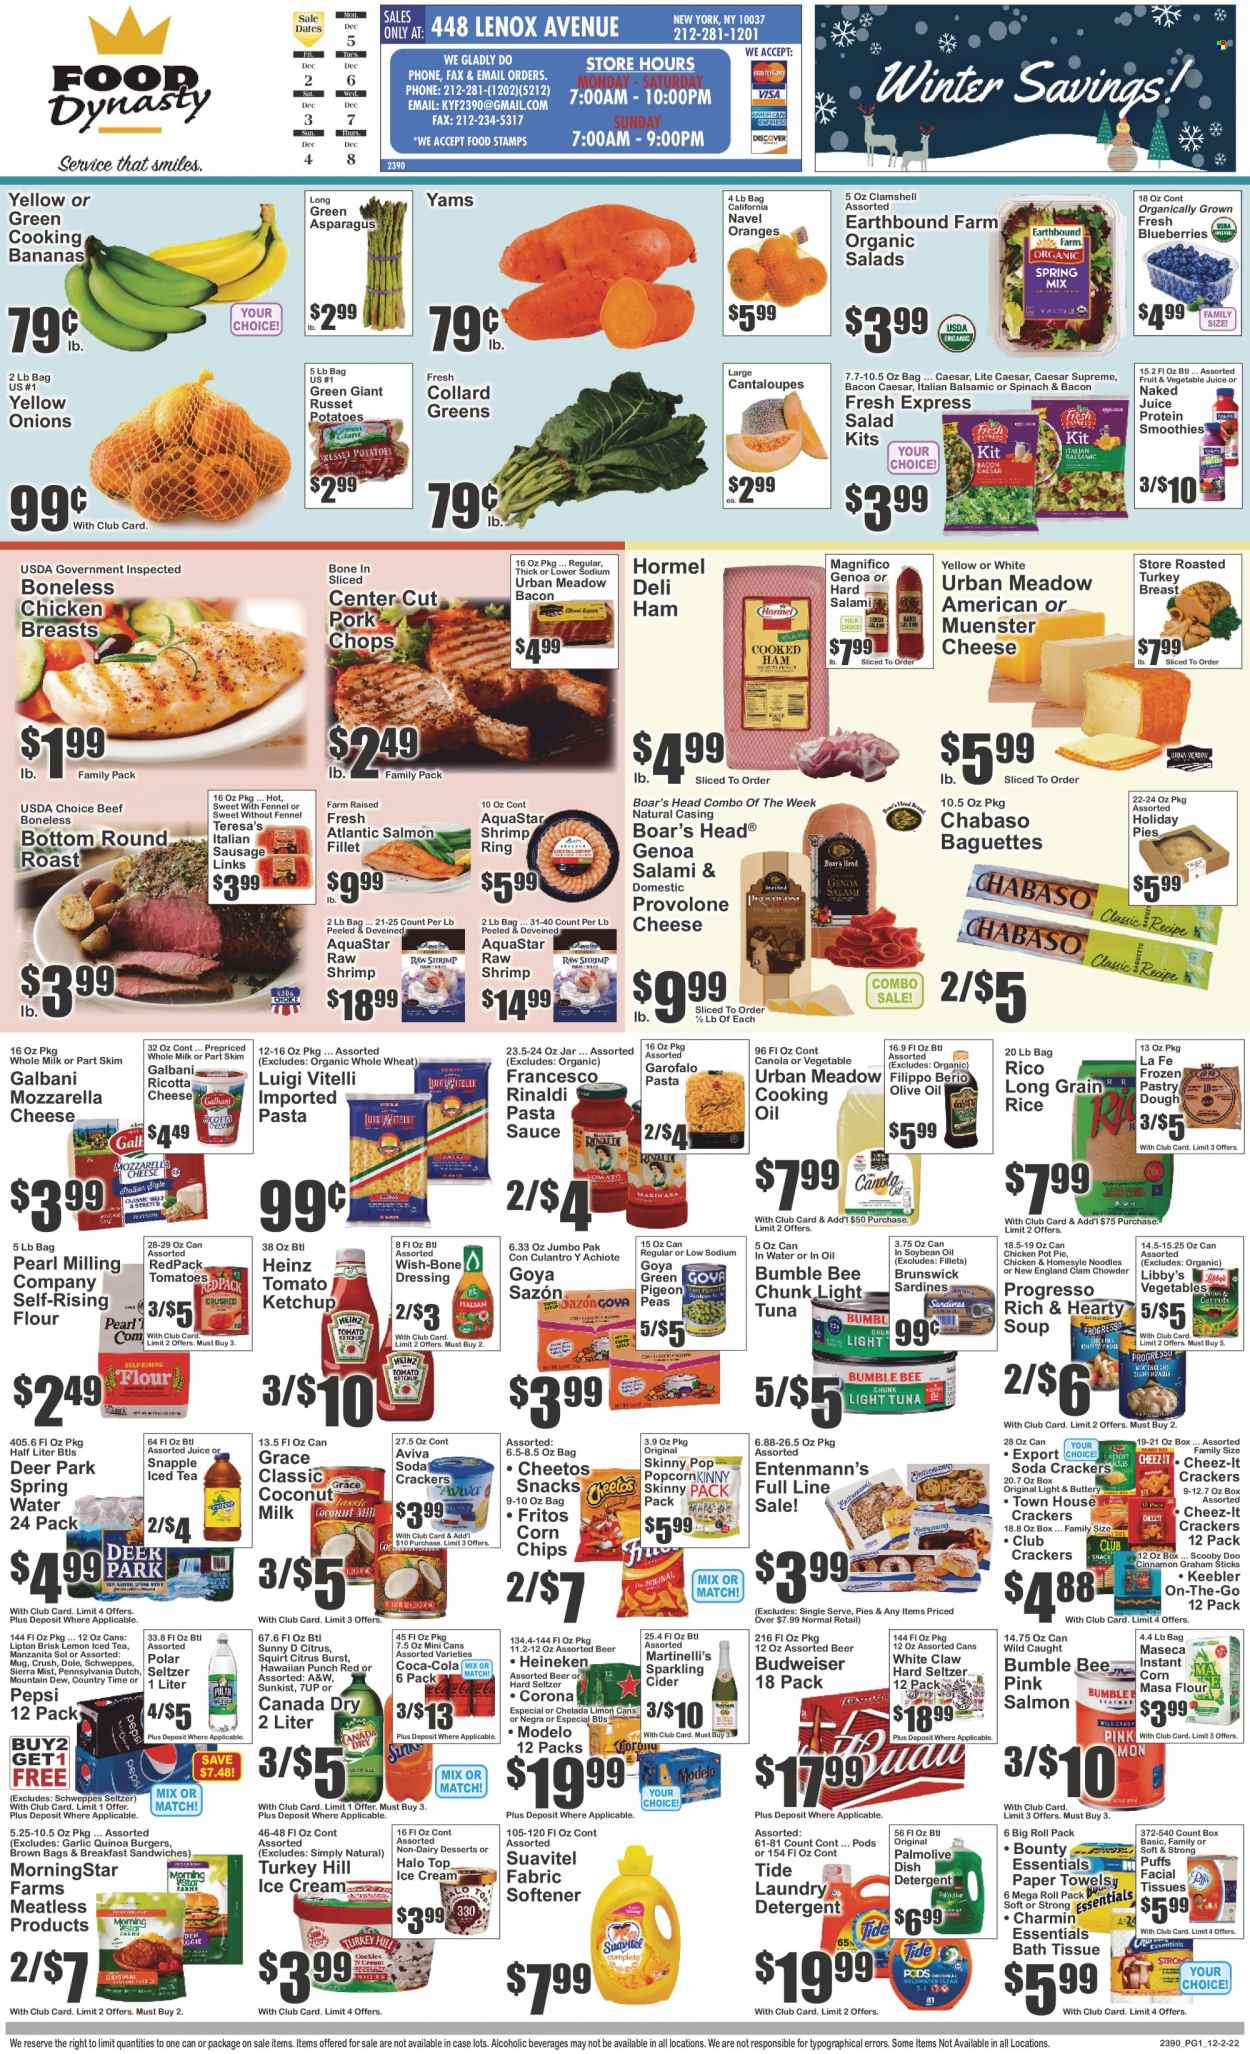 thumbnail - Food Dynasty Flyer - 12/02/2022 - 12/08/2022 - Sales products - baguette, pie, pot pie, puffs, Entenmann's, asparagus, cantaloupe, collard greens, garlic, russet potatoes, tomatoes, potatoes, peas, salad, Dole, blueberries, oranges, salmon, salmon fillet, sardines, tuna, shrimps, pasta sauce, soup, hamburger, Bumble Bee, sauce, noodles, Progresso, MorningStar Farms, Hormel, salami, ham, sausage, italian sausage, mozzarella, ricotta, Münster cheese, Galbani, Provolone, ice cream, snack, Bounty, crackers, Keebler, Fritos, Cheetos, corn chips, popcorn, Cheez-It, Skinny Pop, flour, coconut milk, Heinz, light tuna, clam chowder, Goya, quinoa, rice, toor dal, long grain rice, fennel, cinnamon, ketchup, dressing, soya oil, olive oil, cooking oil, Canada Dry, Coca-Cola, Mountain Dew, Schweppes, Pepsi, juice, Lipton, ice tea, 7UP, Snapple, A&W, Sierra Mist, vegetable juice, Country Time, smoothie, spring water, soda, sparkling cider, sparkling wine, White Claw, Hard Seltzer, cider, beer, Corona Extra, Heineken, Modelo, chicken breasts, beef meat, round roast, pork chops, pork meat, bath tissue, kitchen towels, paper towels, Charmin, detergent, Tide, fabric softener, laundry detergent, dishwasher cleaner, Palmolive, facial tissues, Lenox, mug, pot, Pigeon, Budweiser, navel oranges. Page 1.